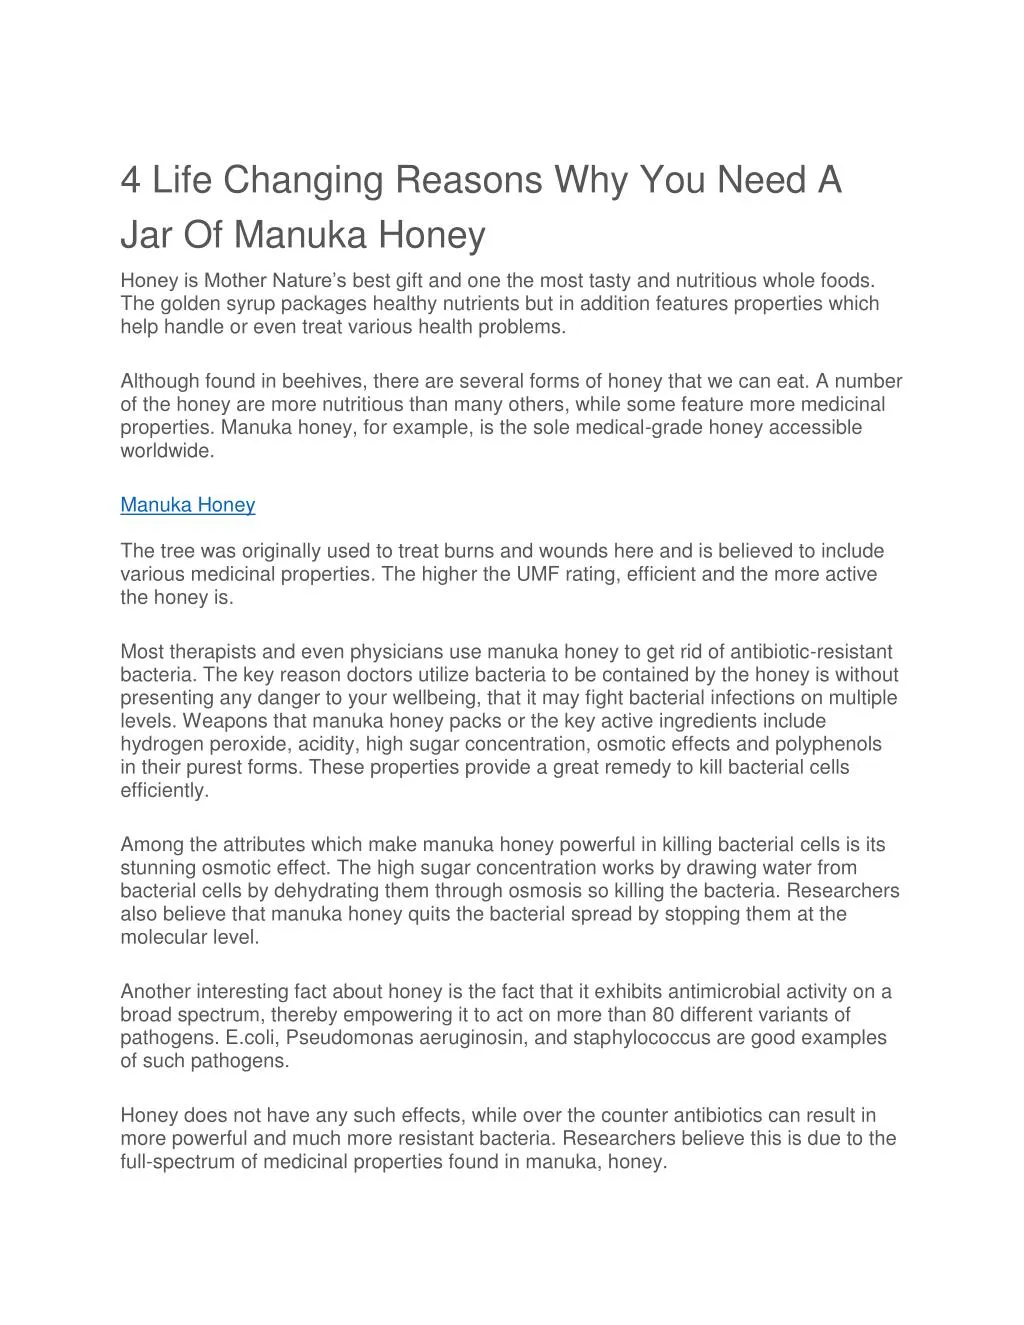 4 life changing reasons why you need